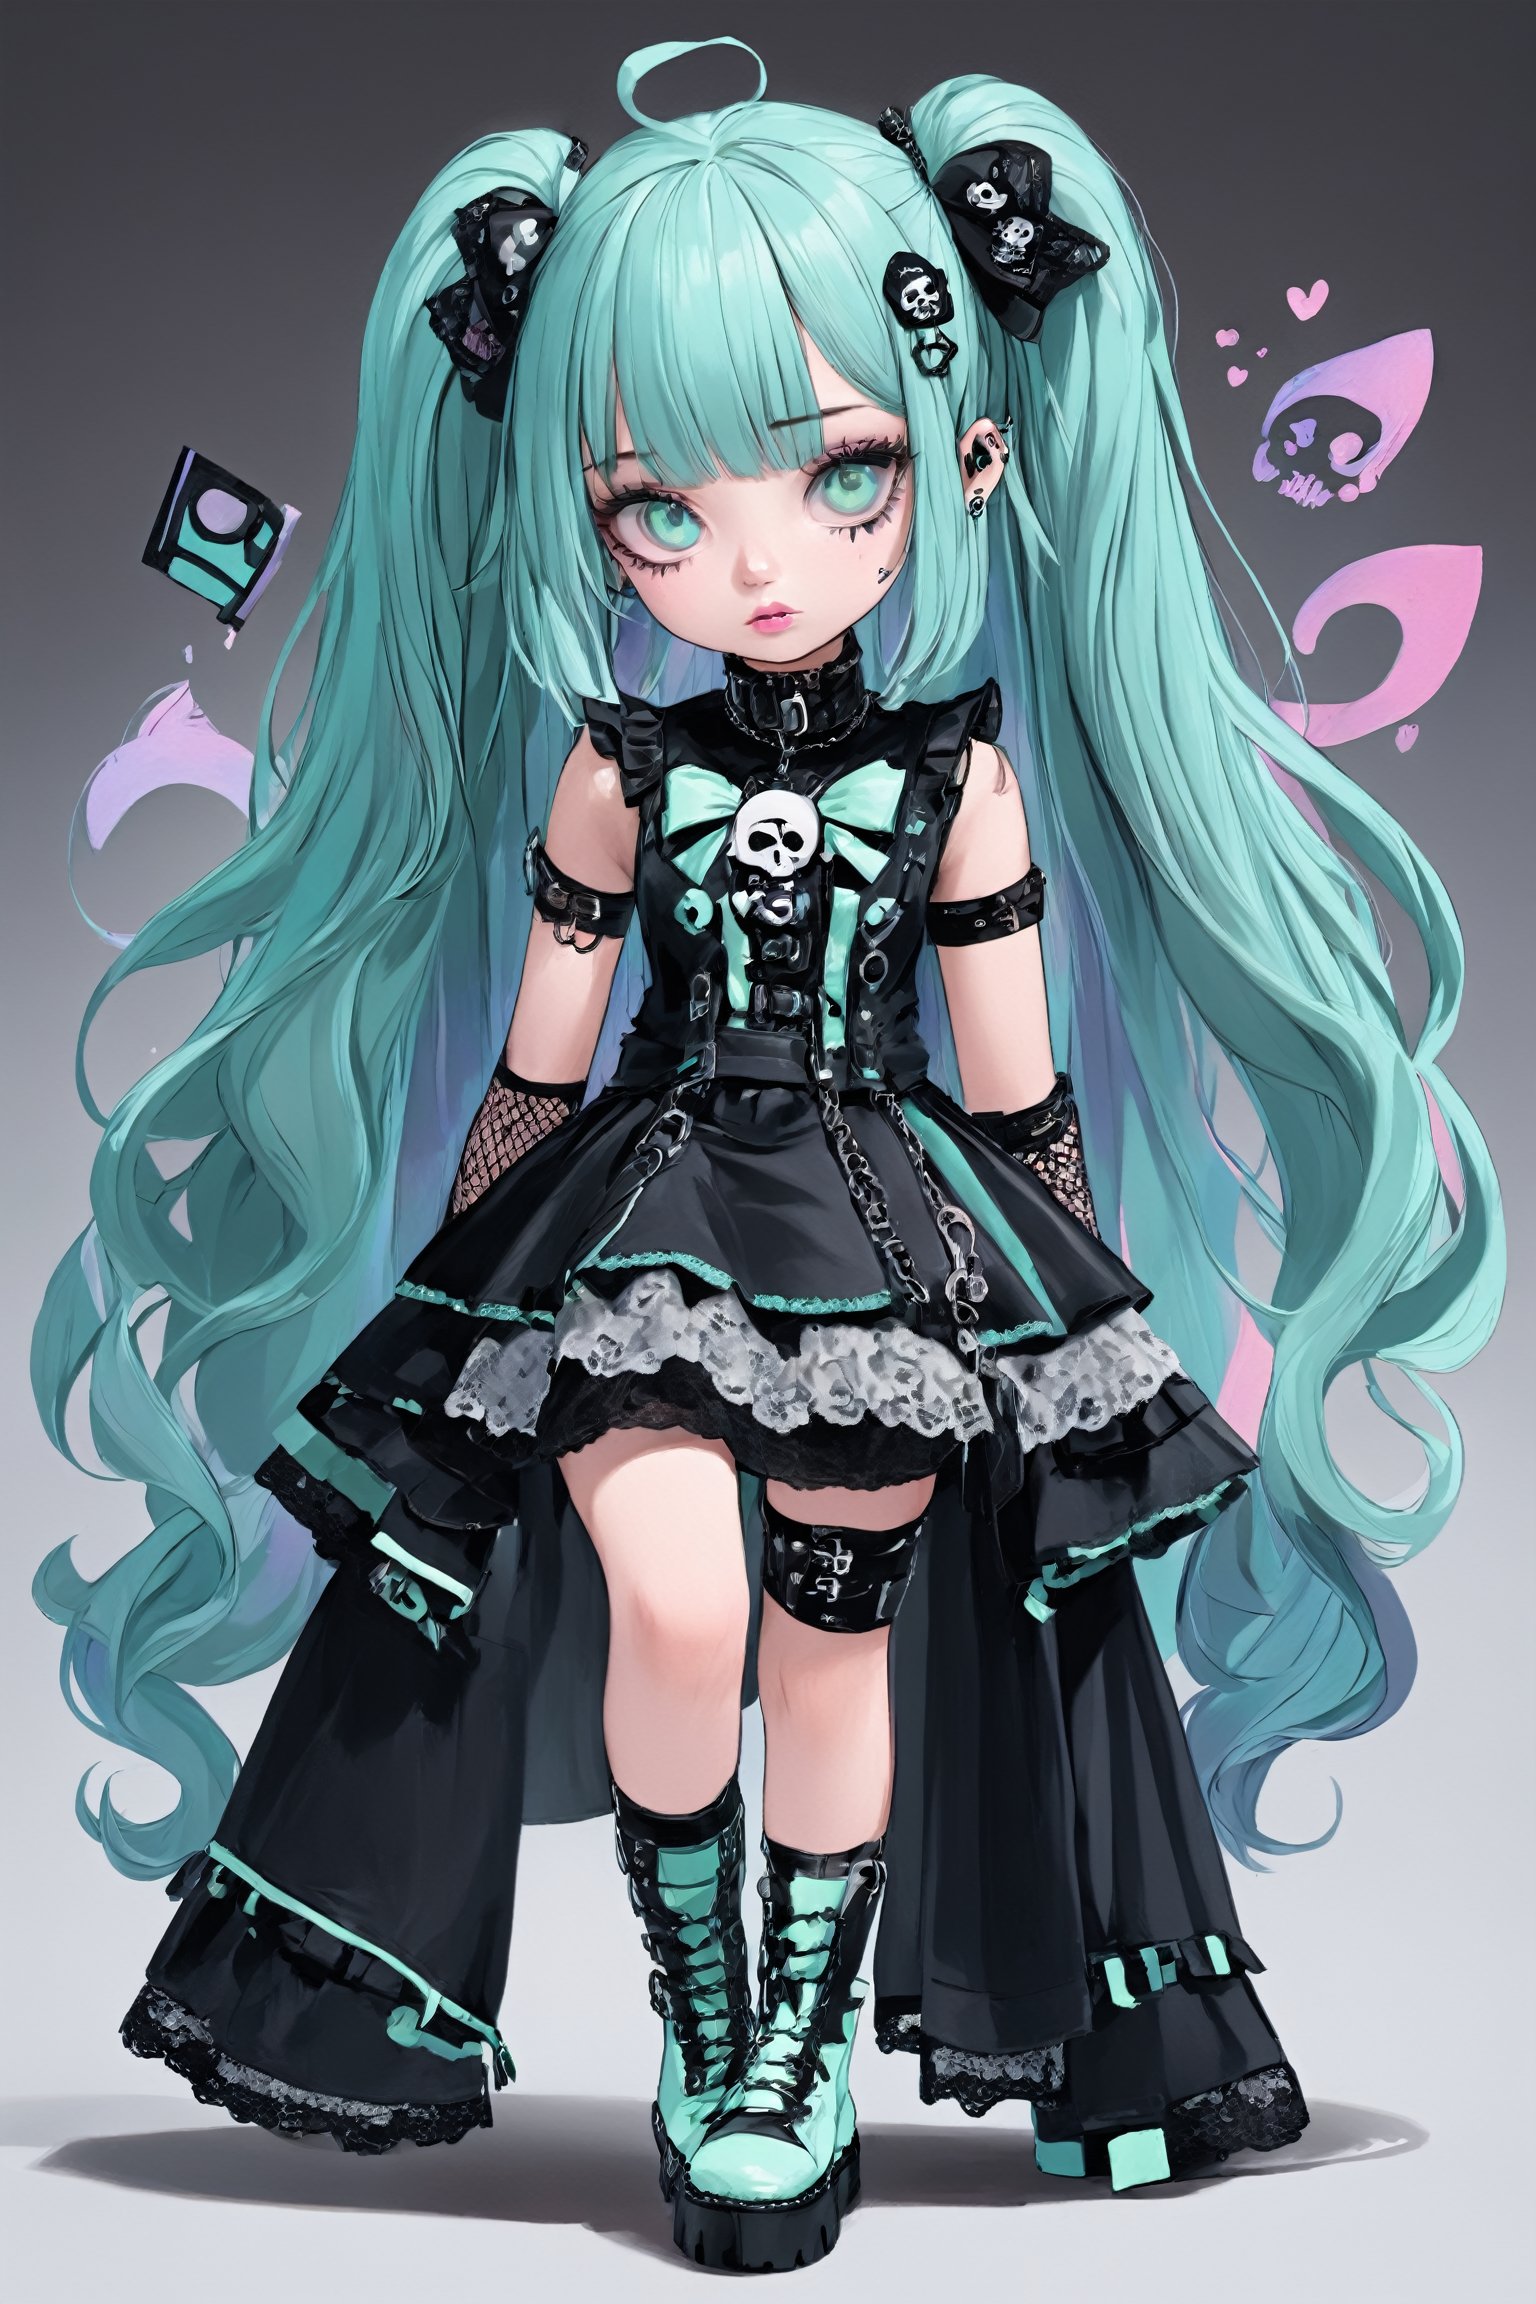 1Girl, VTuber with a Gothic Emo style fused with pastel punk fashion, She wears dark, edgy clothing with Gothic elements like lace, corsets, and chains, but in pastel colors like pink, mint green, and lavender. Her hair is a vibrant mix of pastel hues, styled with asymmetrical bangs, adorned with small skulls or bows. Accessories include studded bracelets, chokers, and combat boots, all in pastel shades. Her makeup features dark eyeliner and eyeshadow, contrasted with pastel lipstick,vtuber,dal-1,DonMM1y4XL